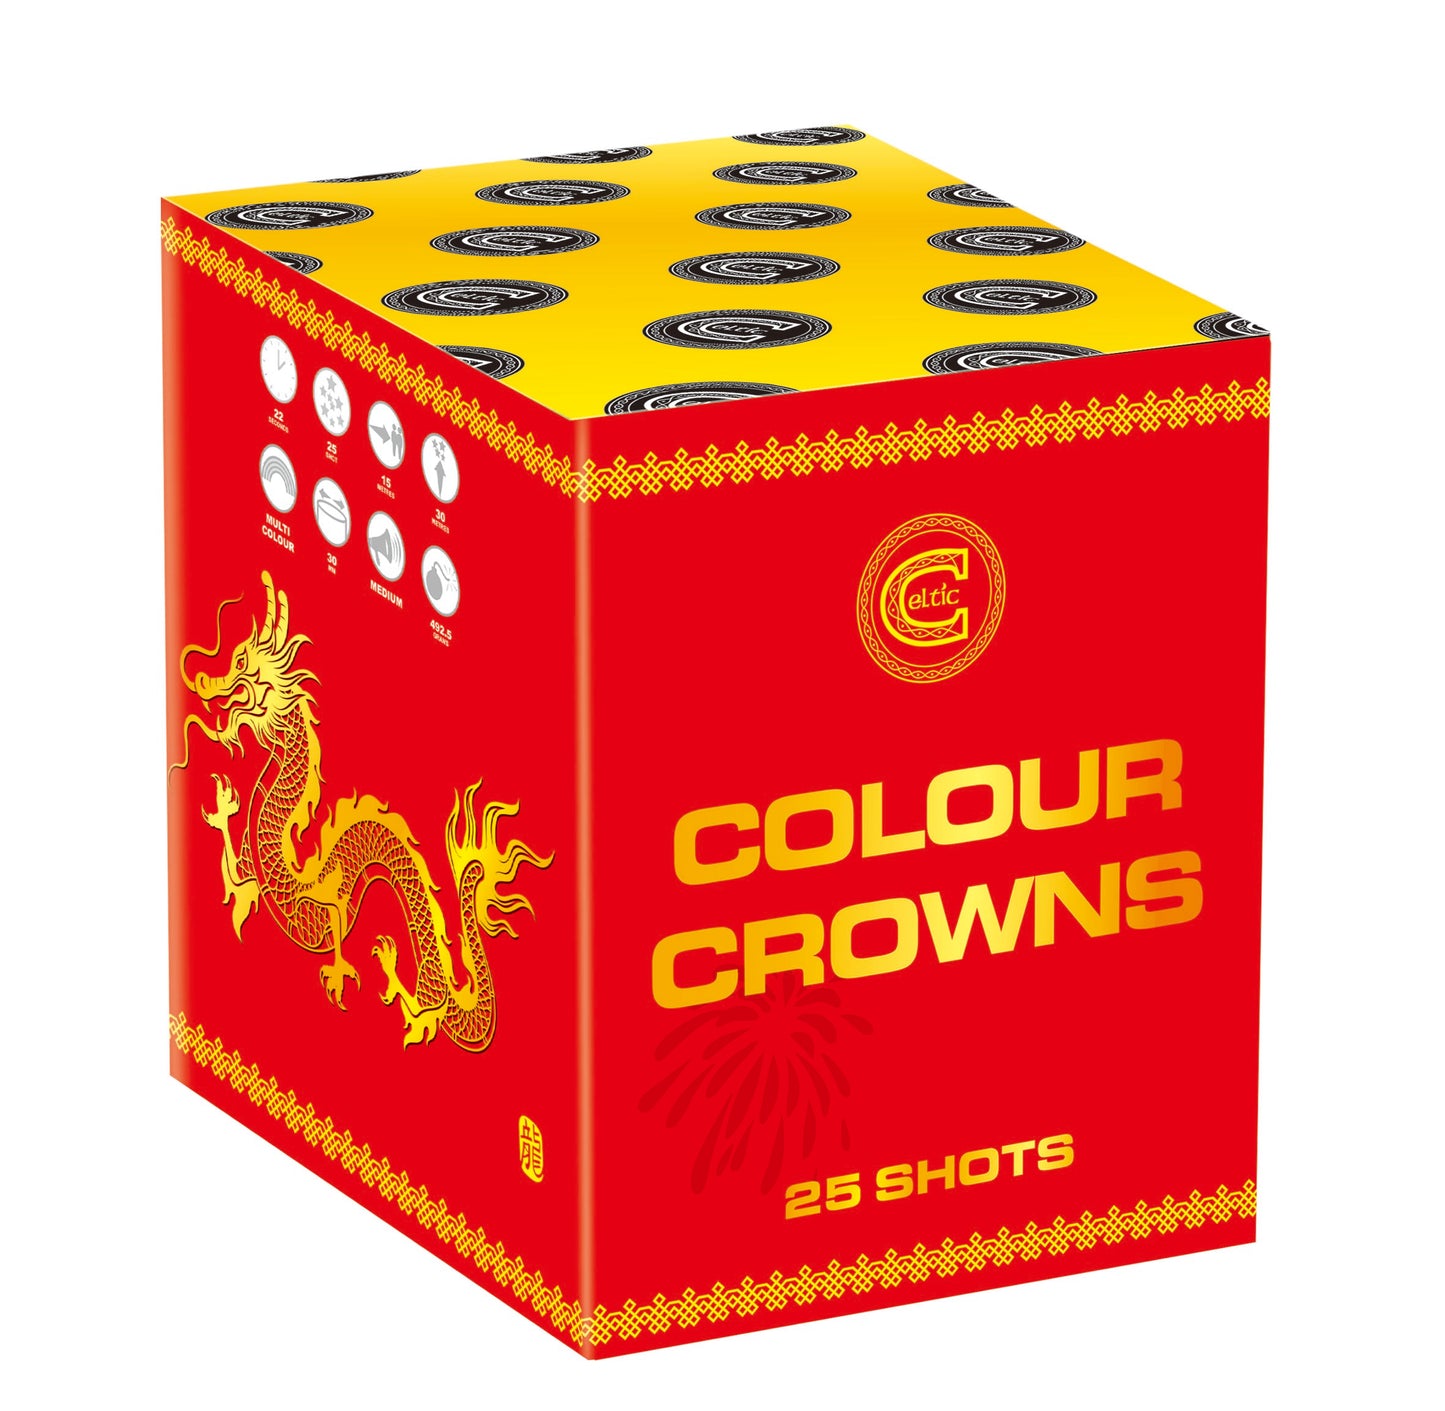 Colour Crowns by Celtic Fireworks